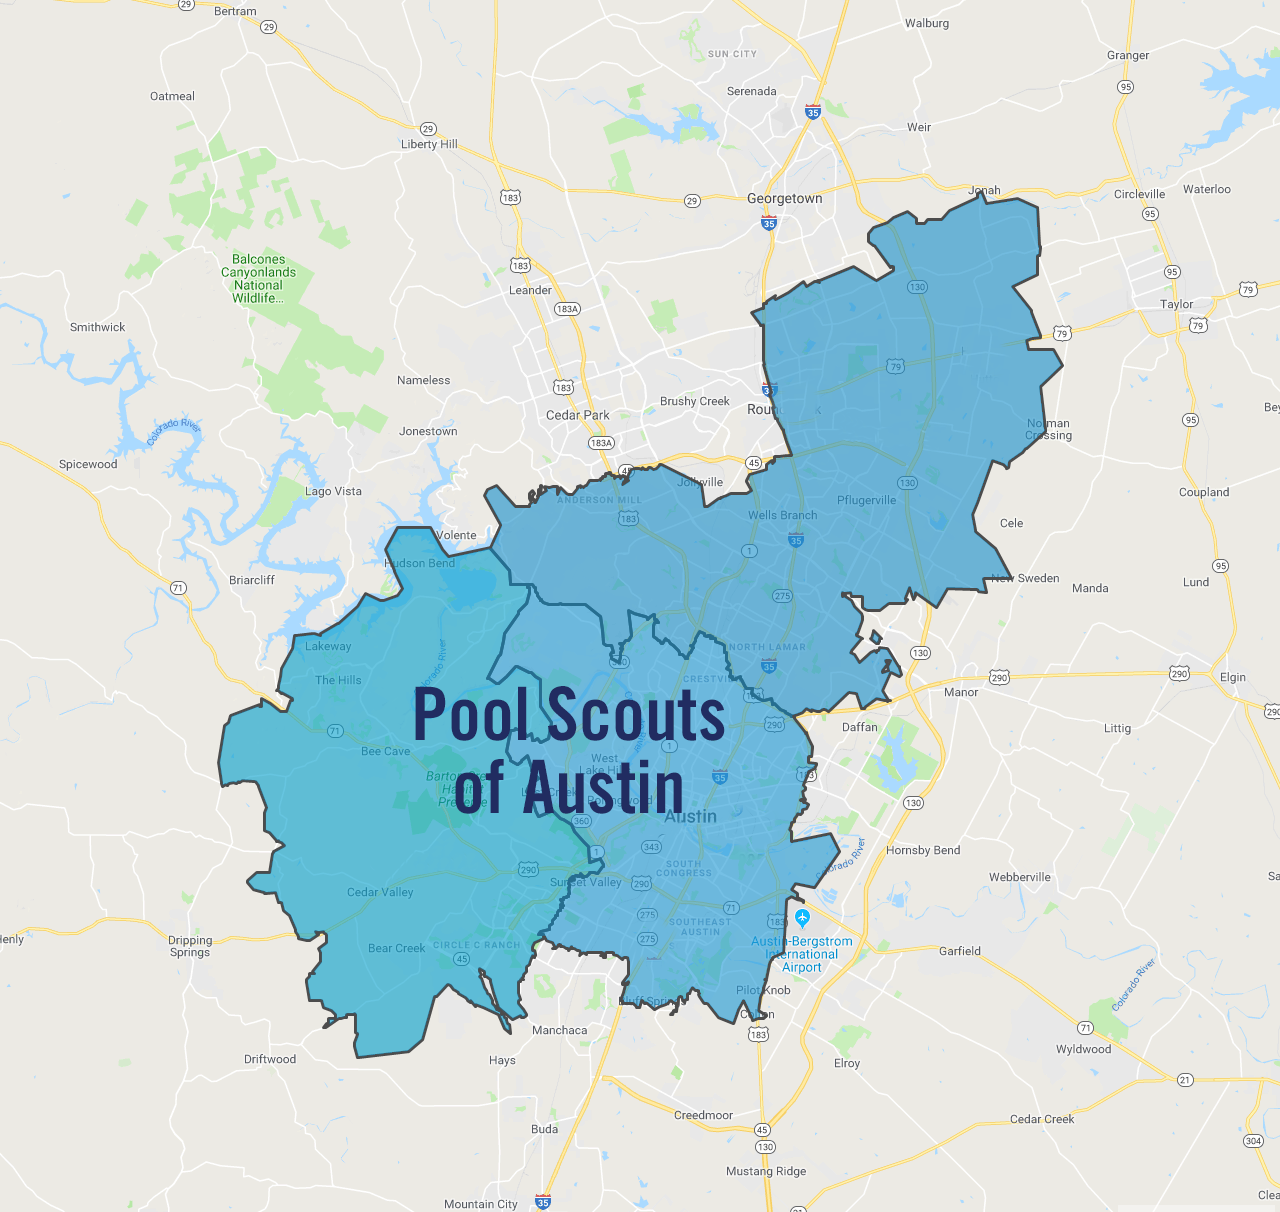 Map highlighting the areas that Pool Scouts of Austin services